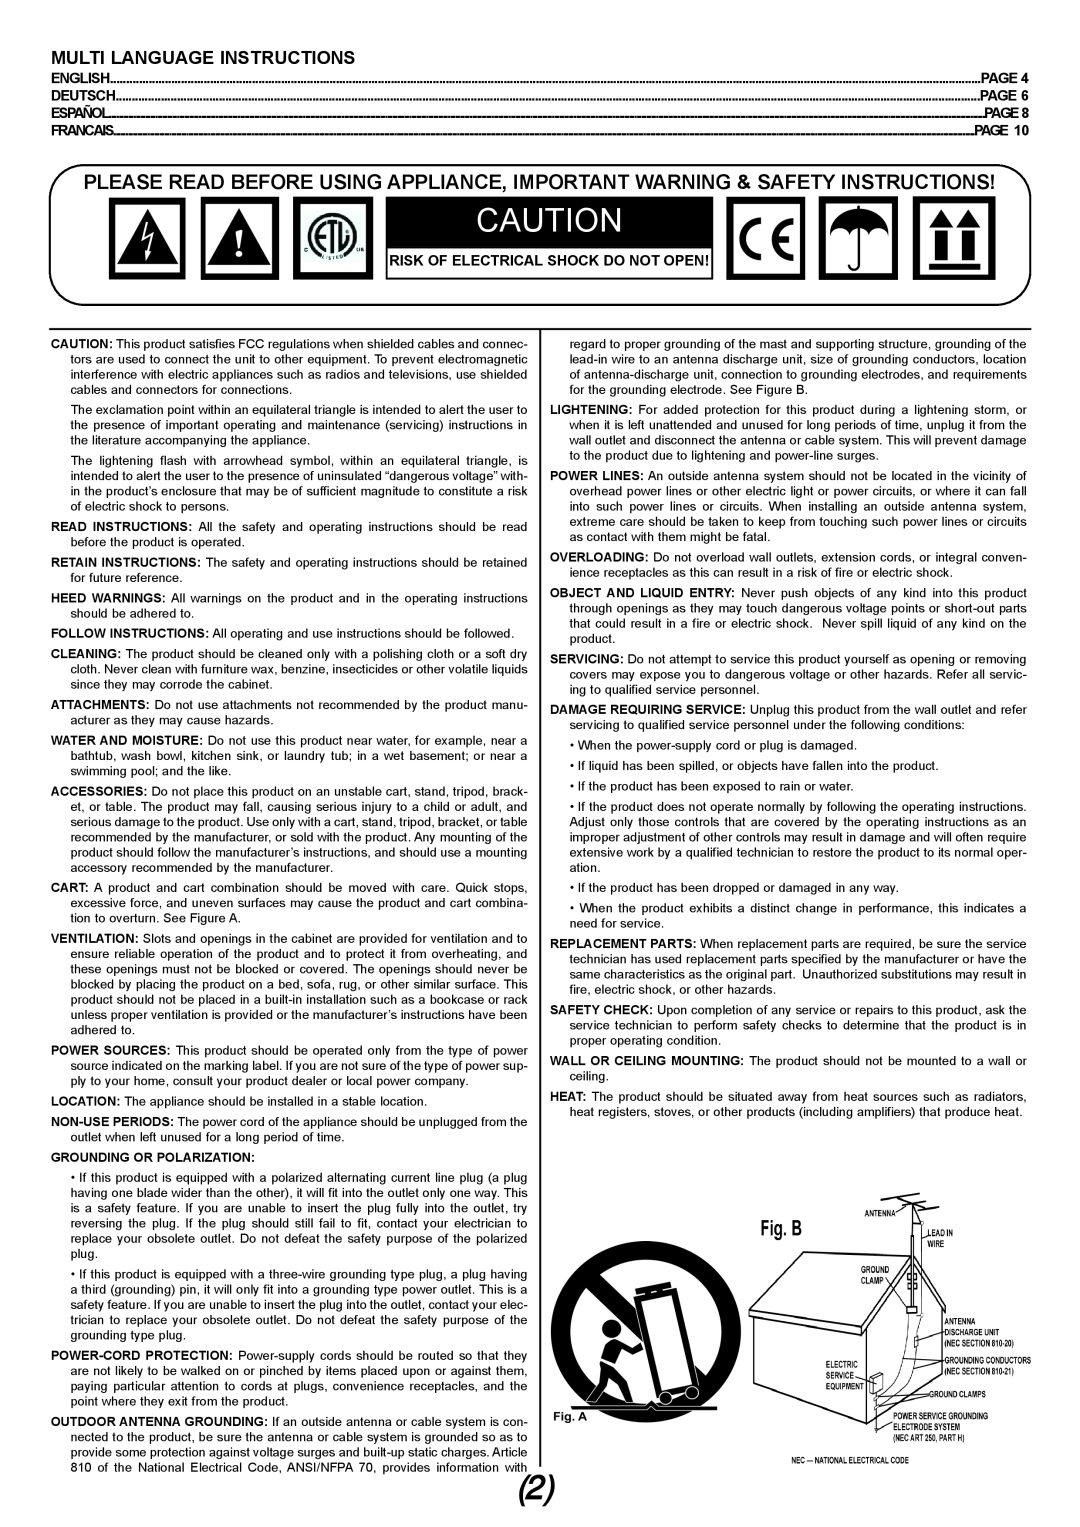 Gemini TT-03 manual Multi Language Instructions, Page, Risk Of Electrical Shock Do Not Open 